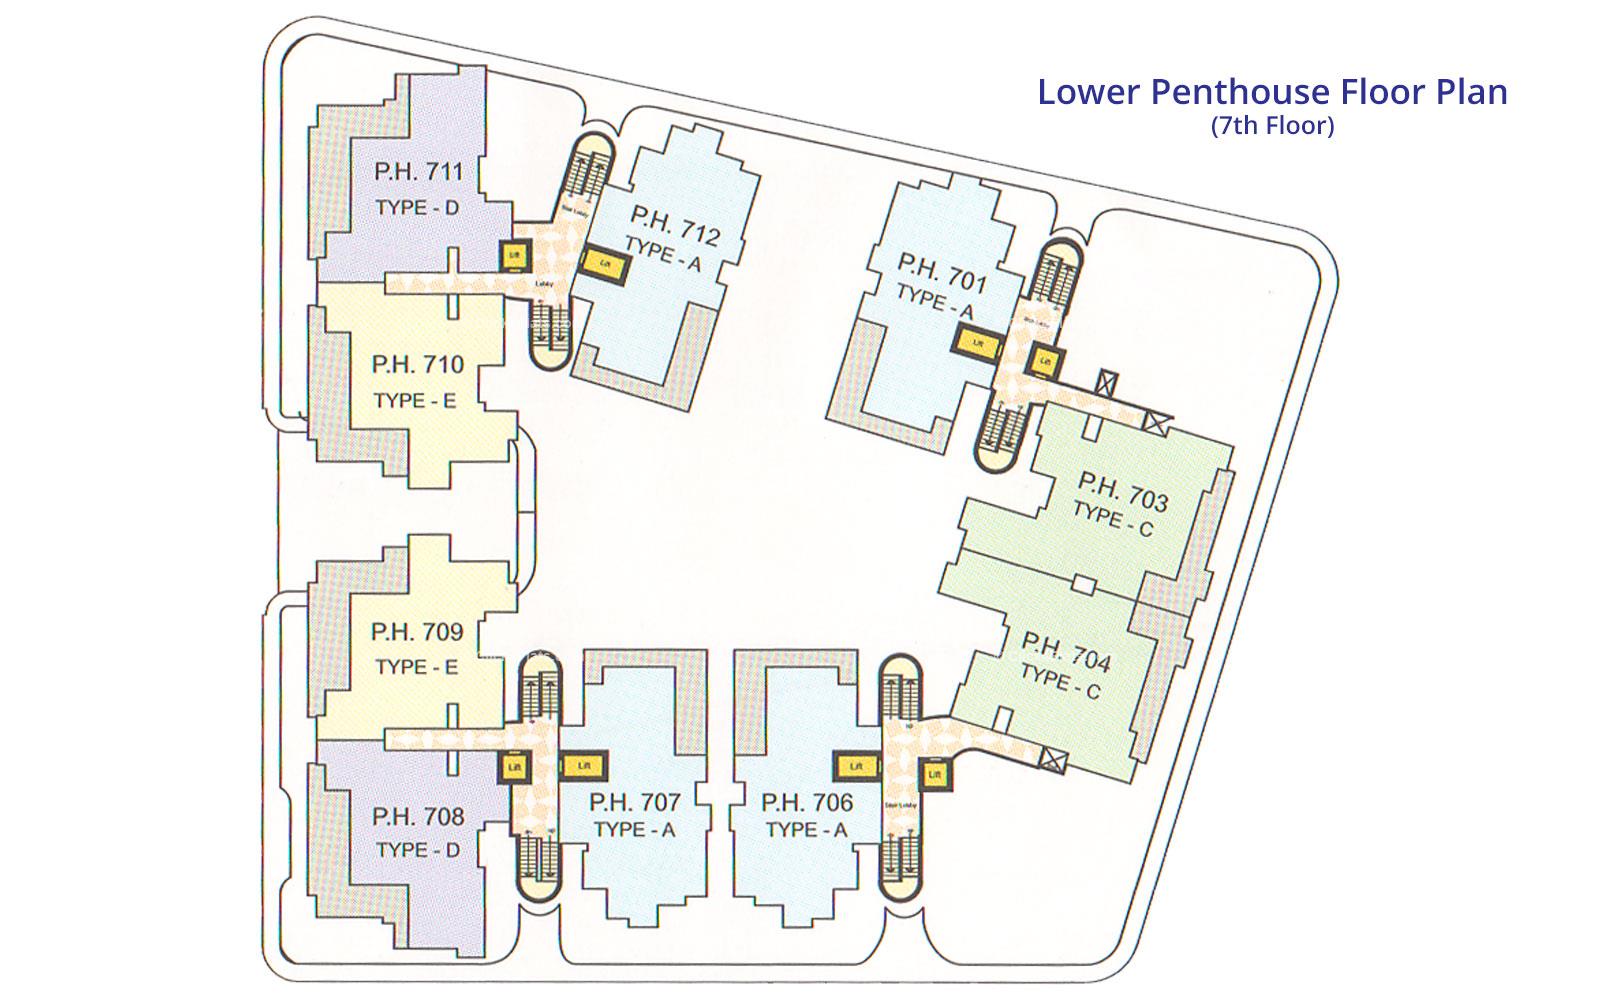 Fountain Square Lower Penthouse Floor Plan